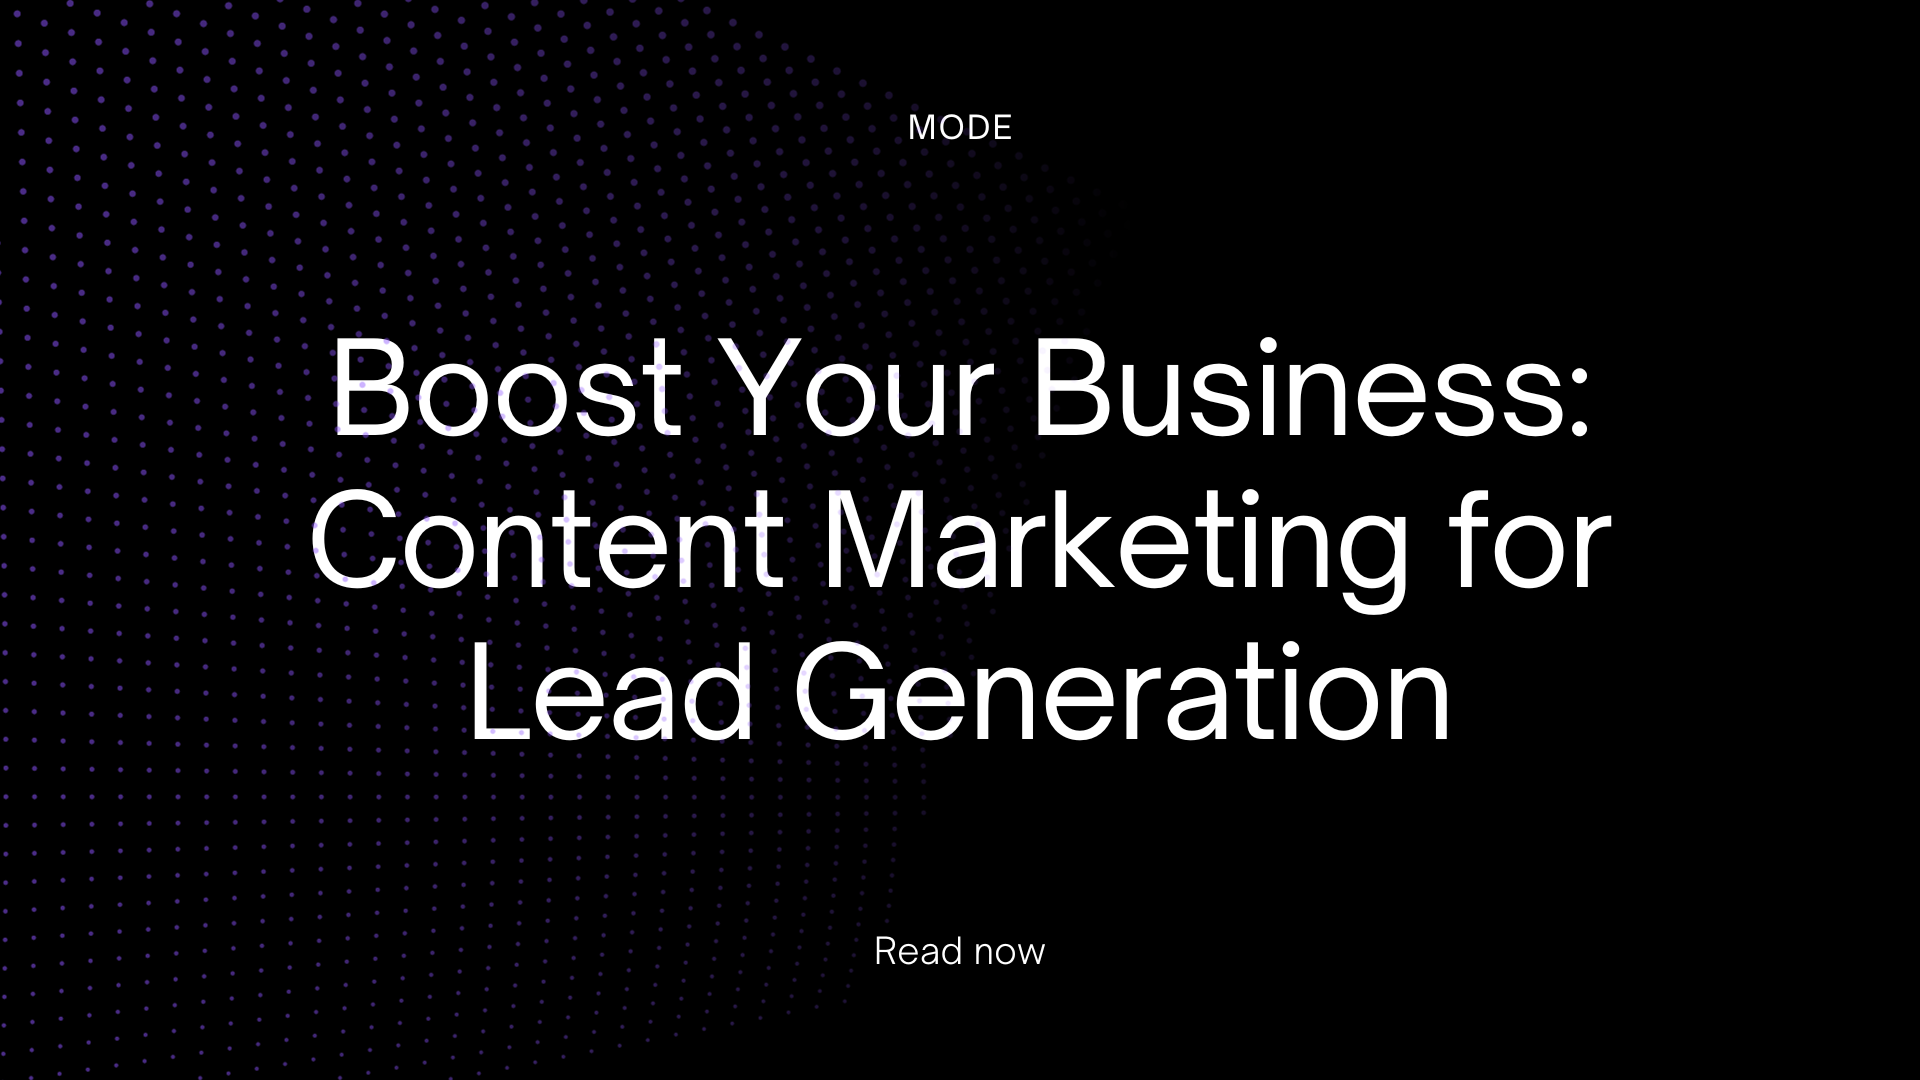 Boost Your Business: Content Marketing for Lead Generation